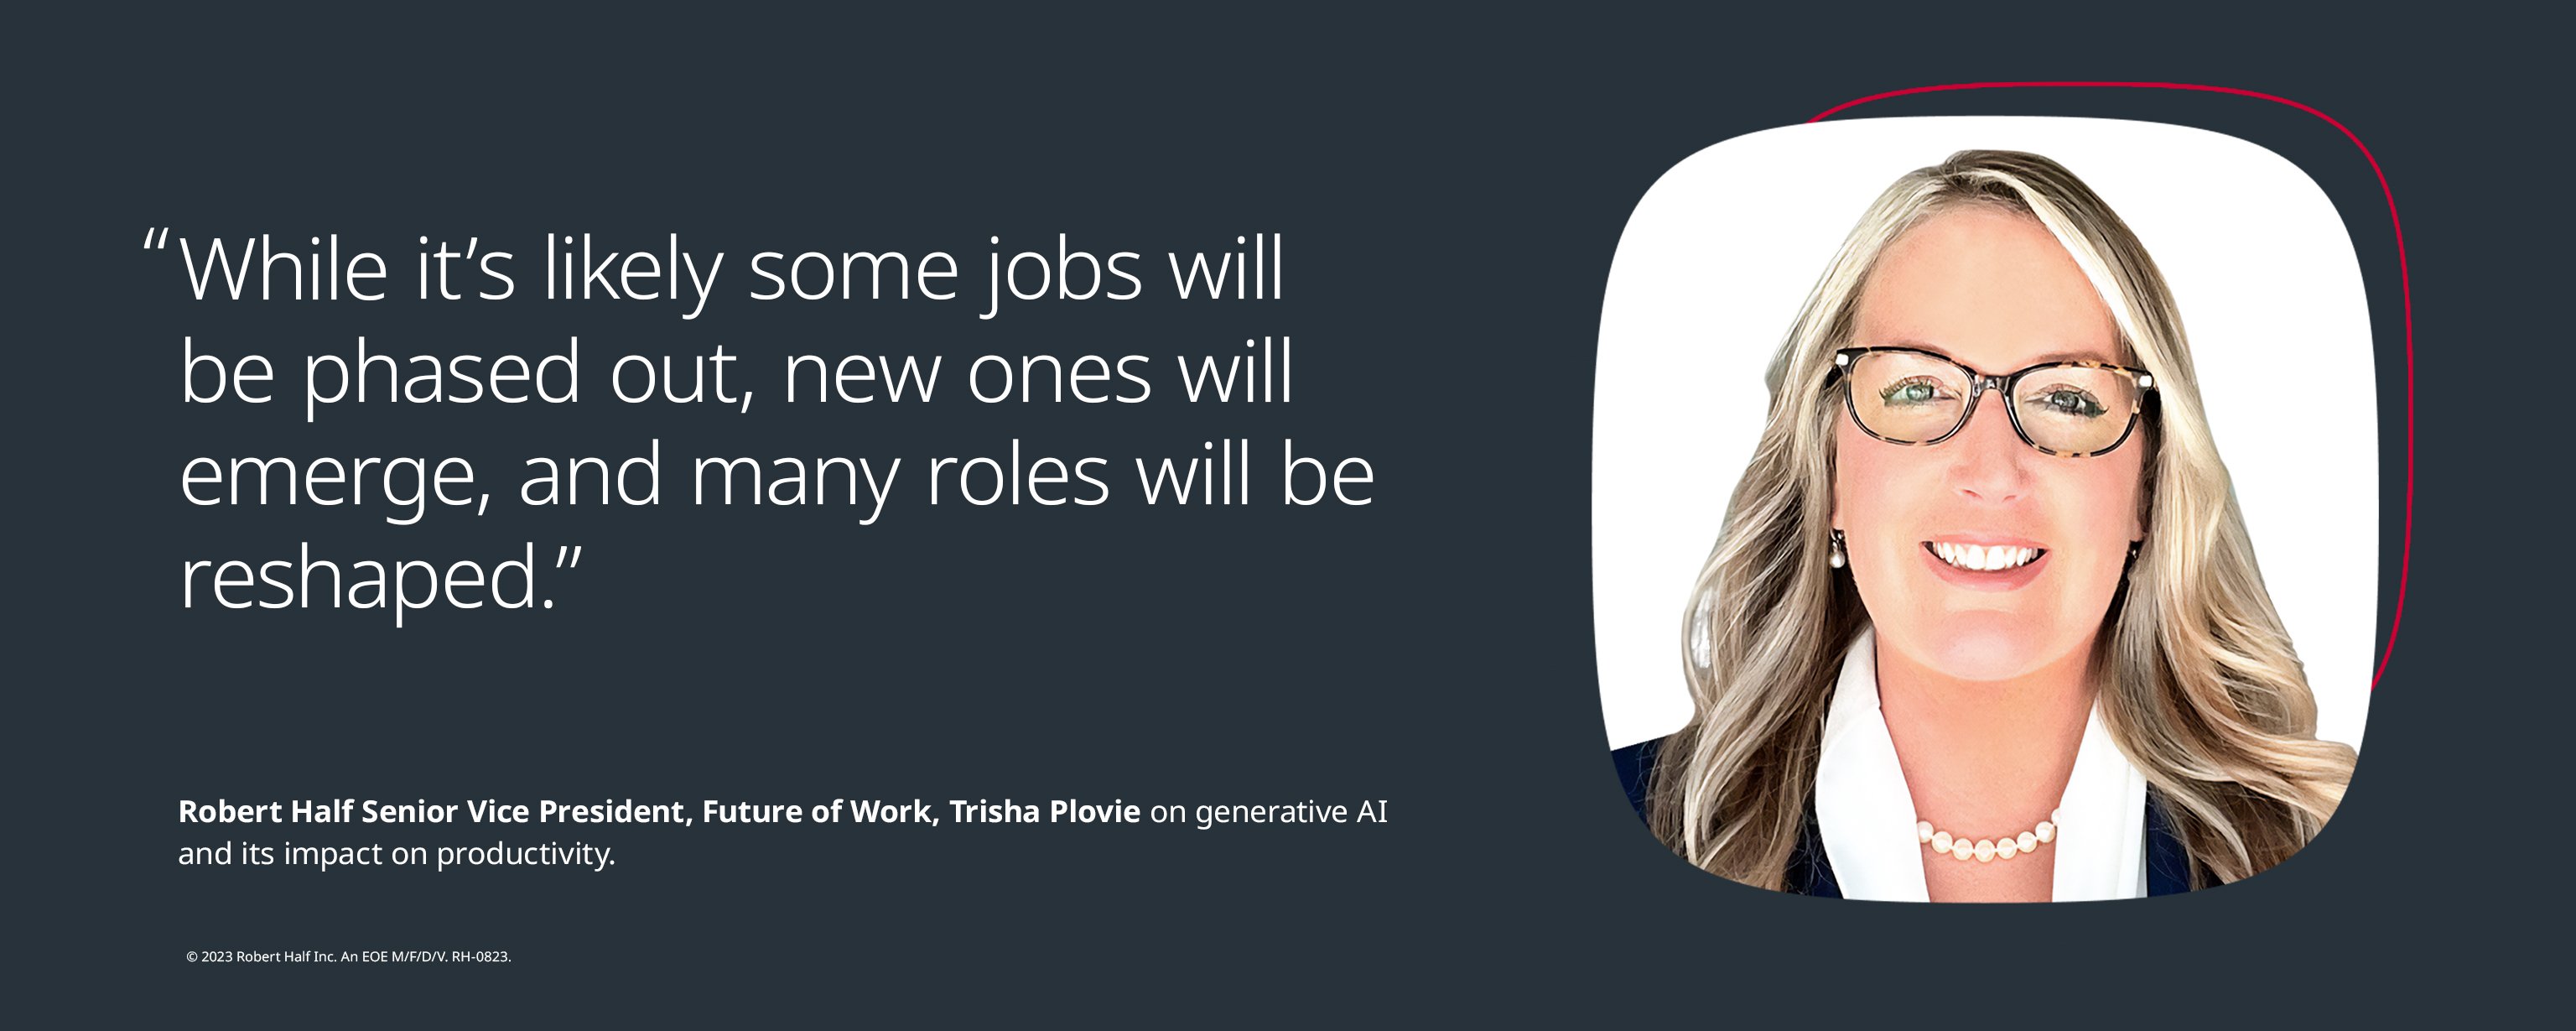 “While it’s likely some jobs will be phased out, new ones will emerge, and many roles will be reshaped.” - Trisha Plovie, Senior Vice President, Future of Work, Robert Half